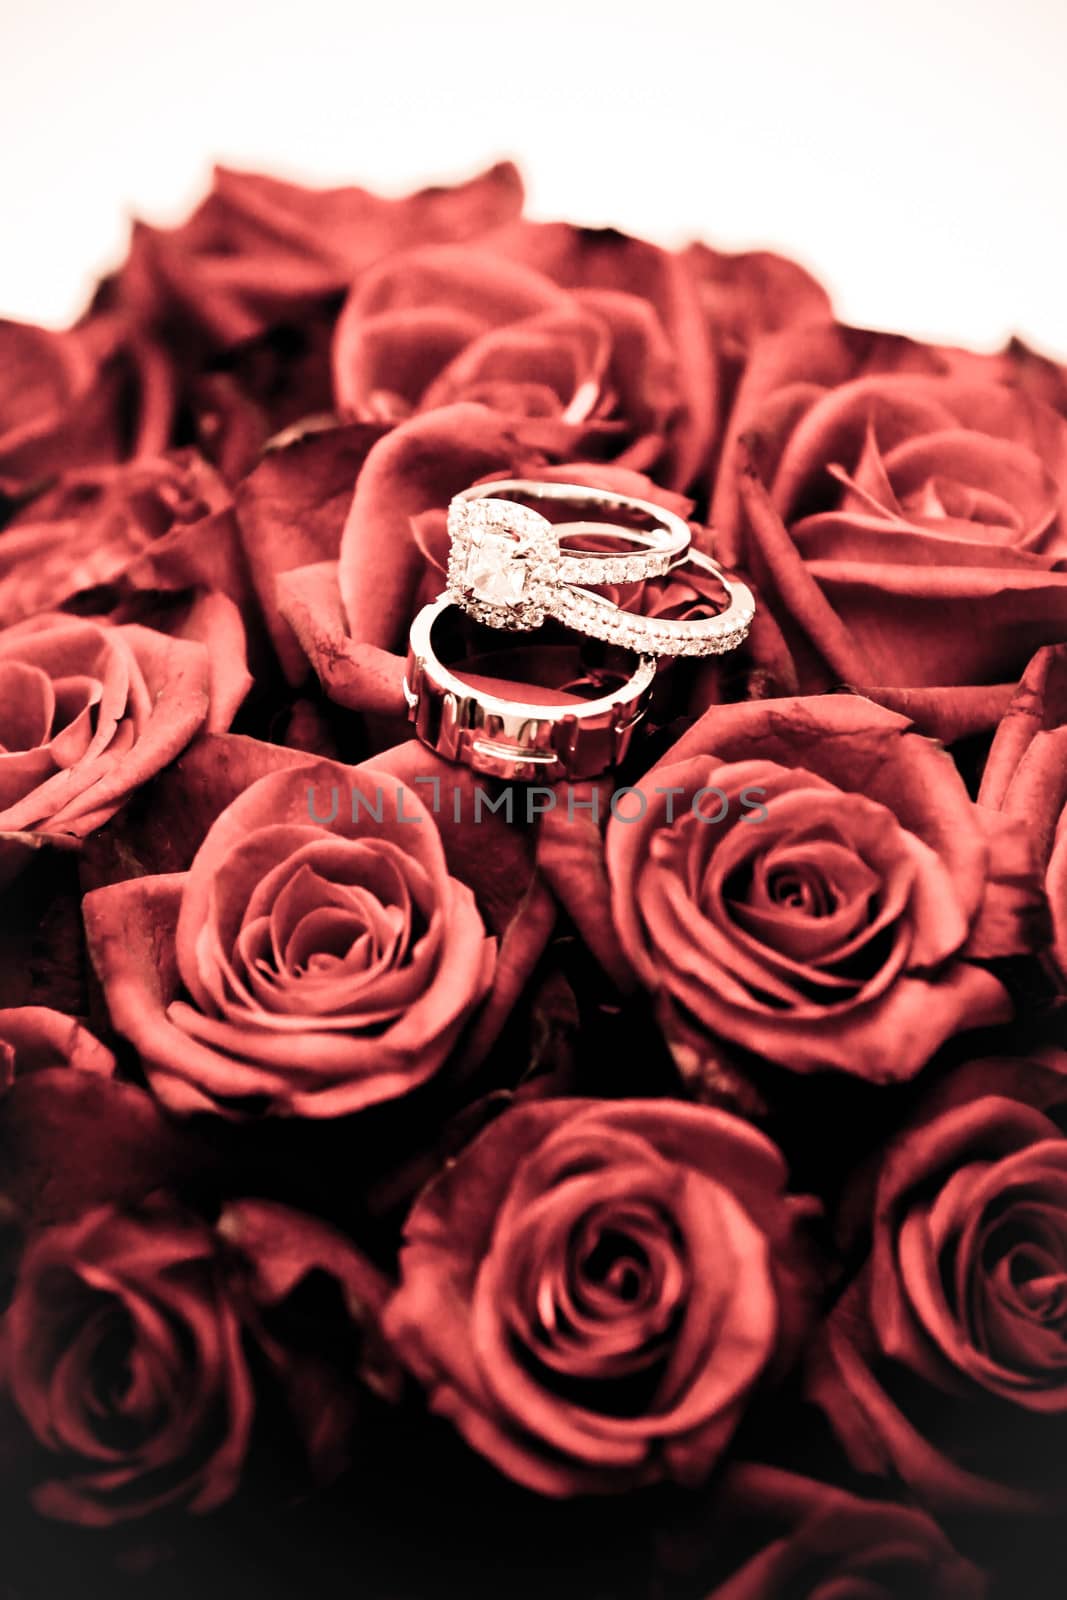 Wedding rings on a bouquet of roses by jrstock